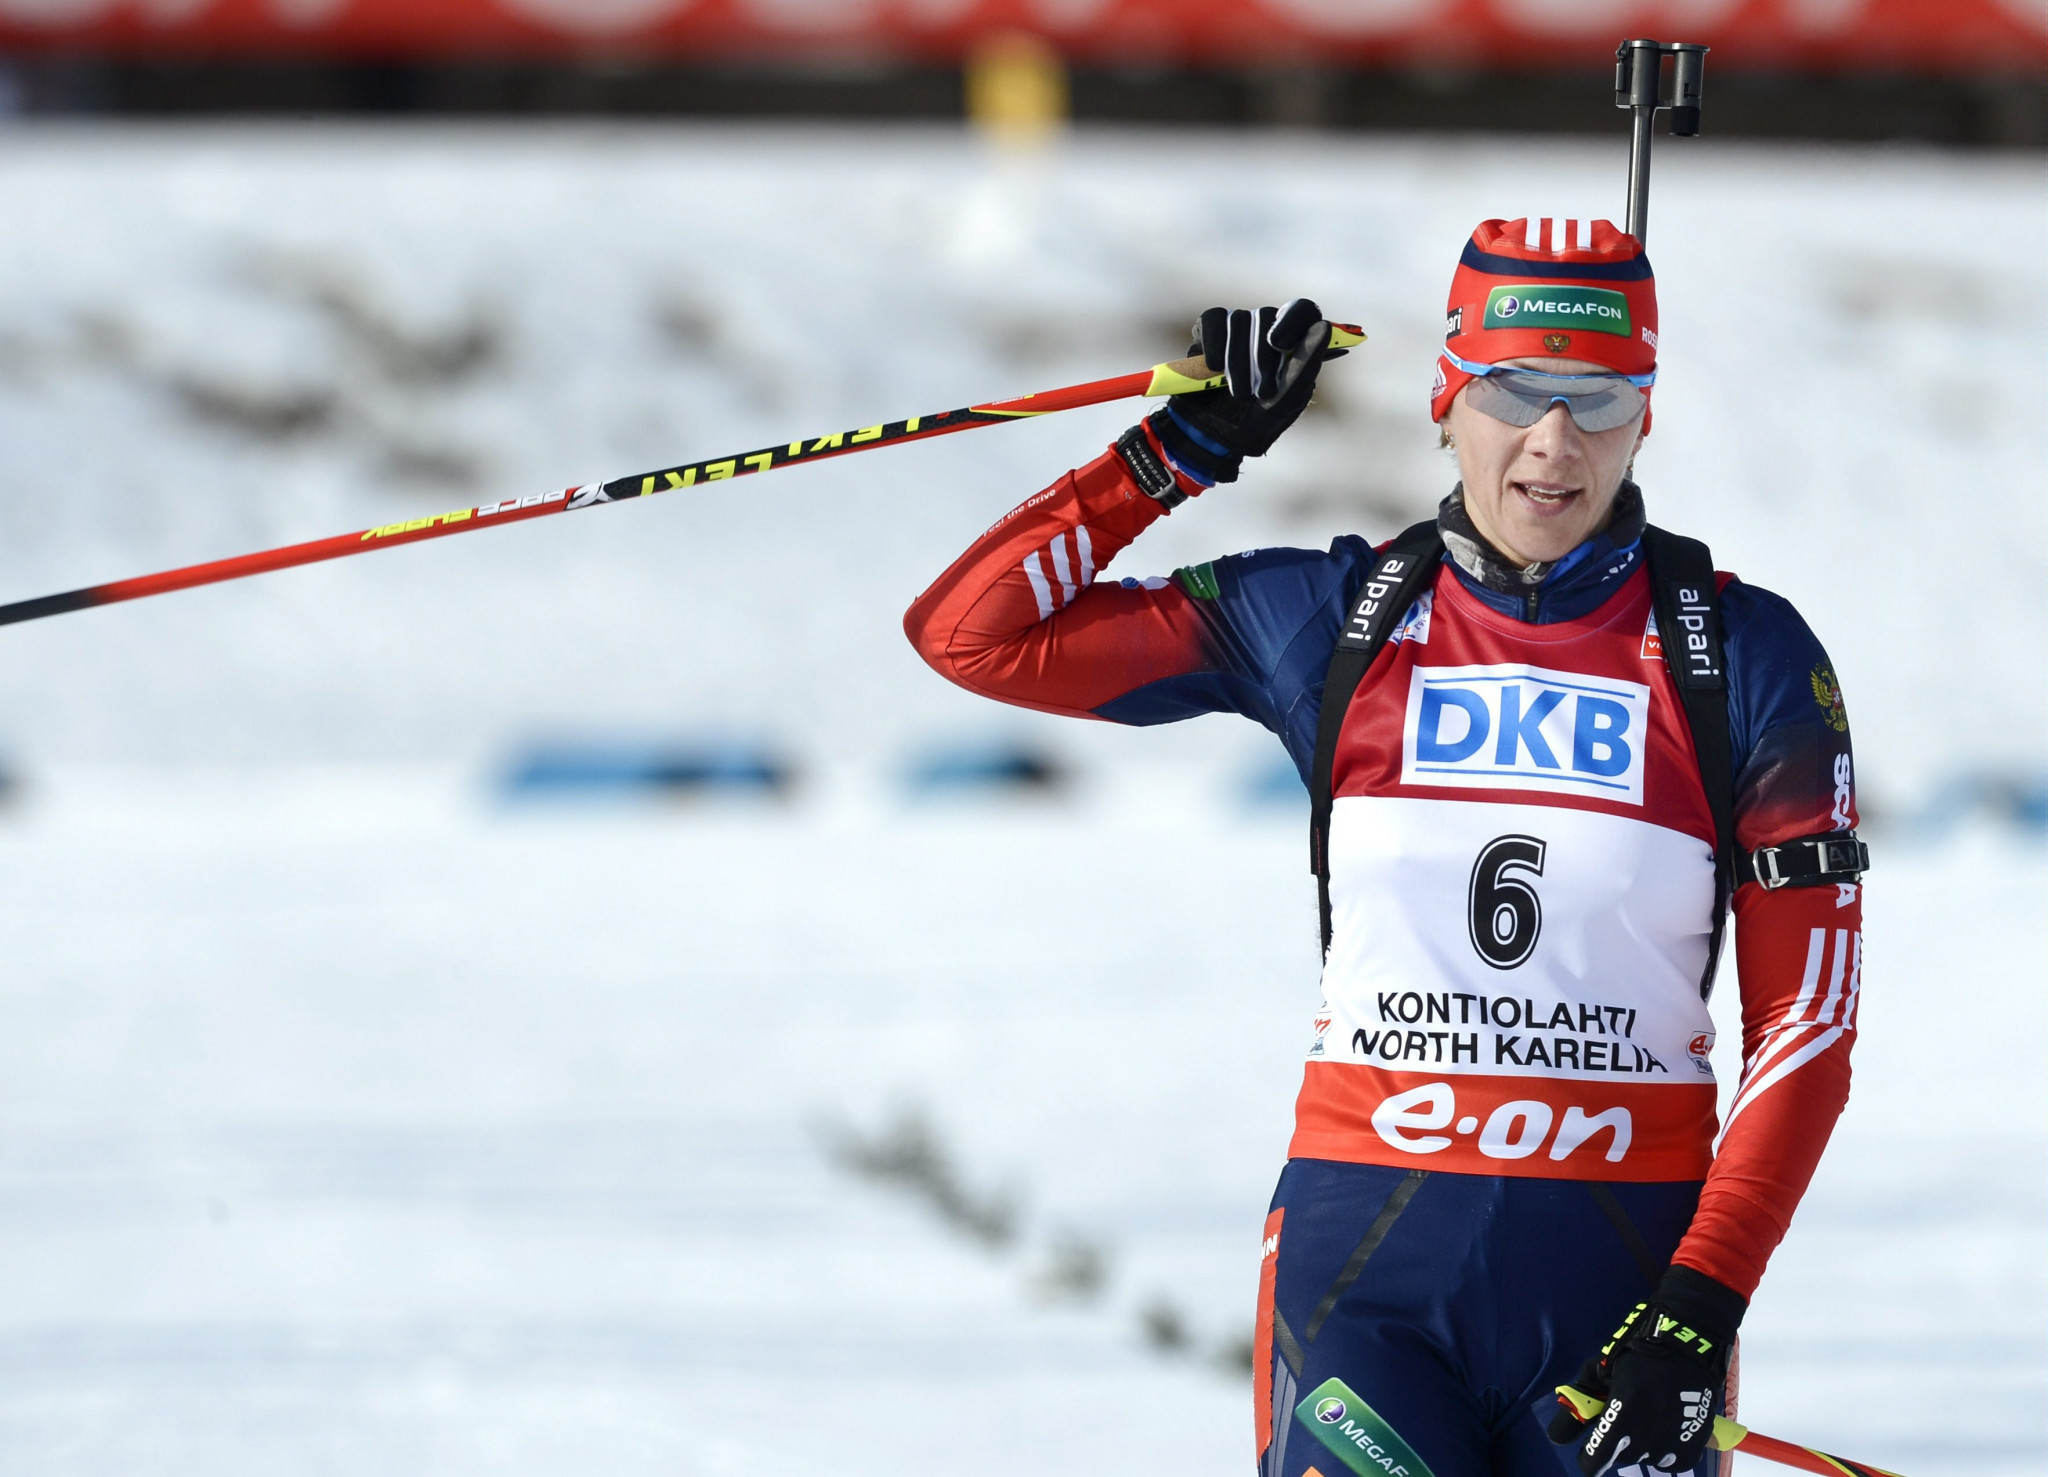 IBU sets Executive Board meeting after Zaitseva disqualification changes 2013-2014 World Cup winner